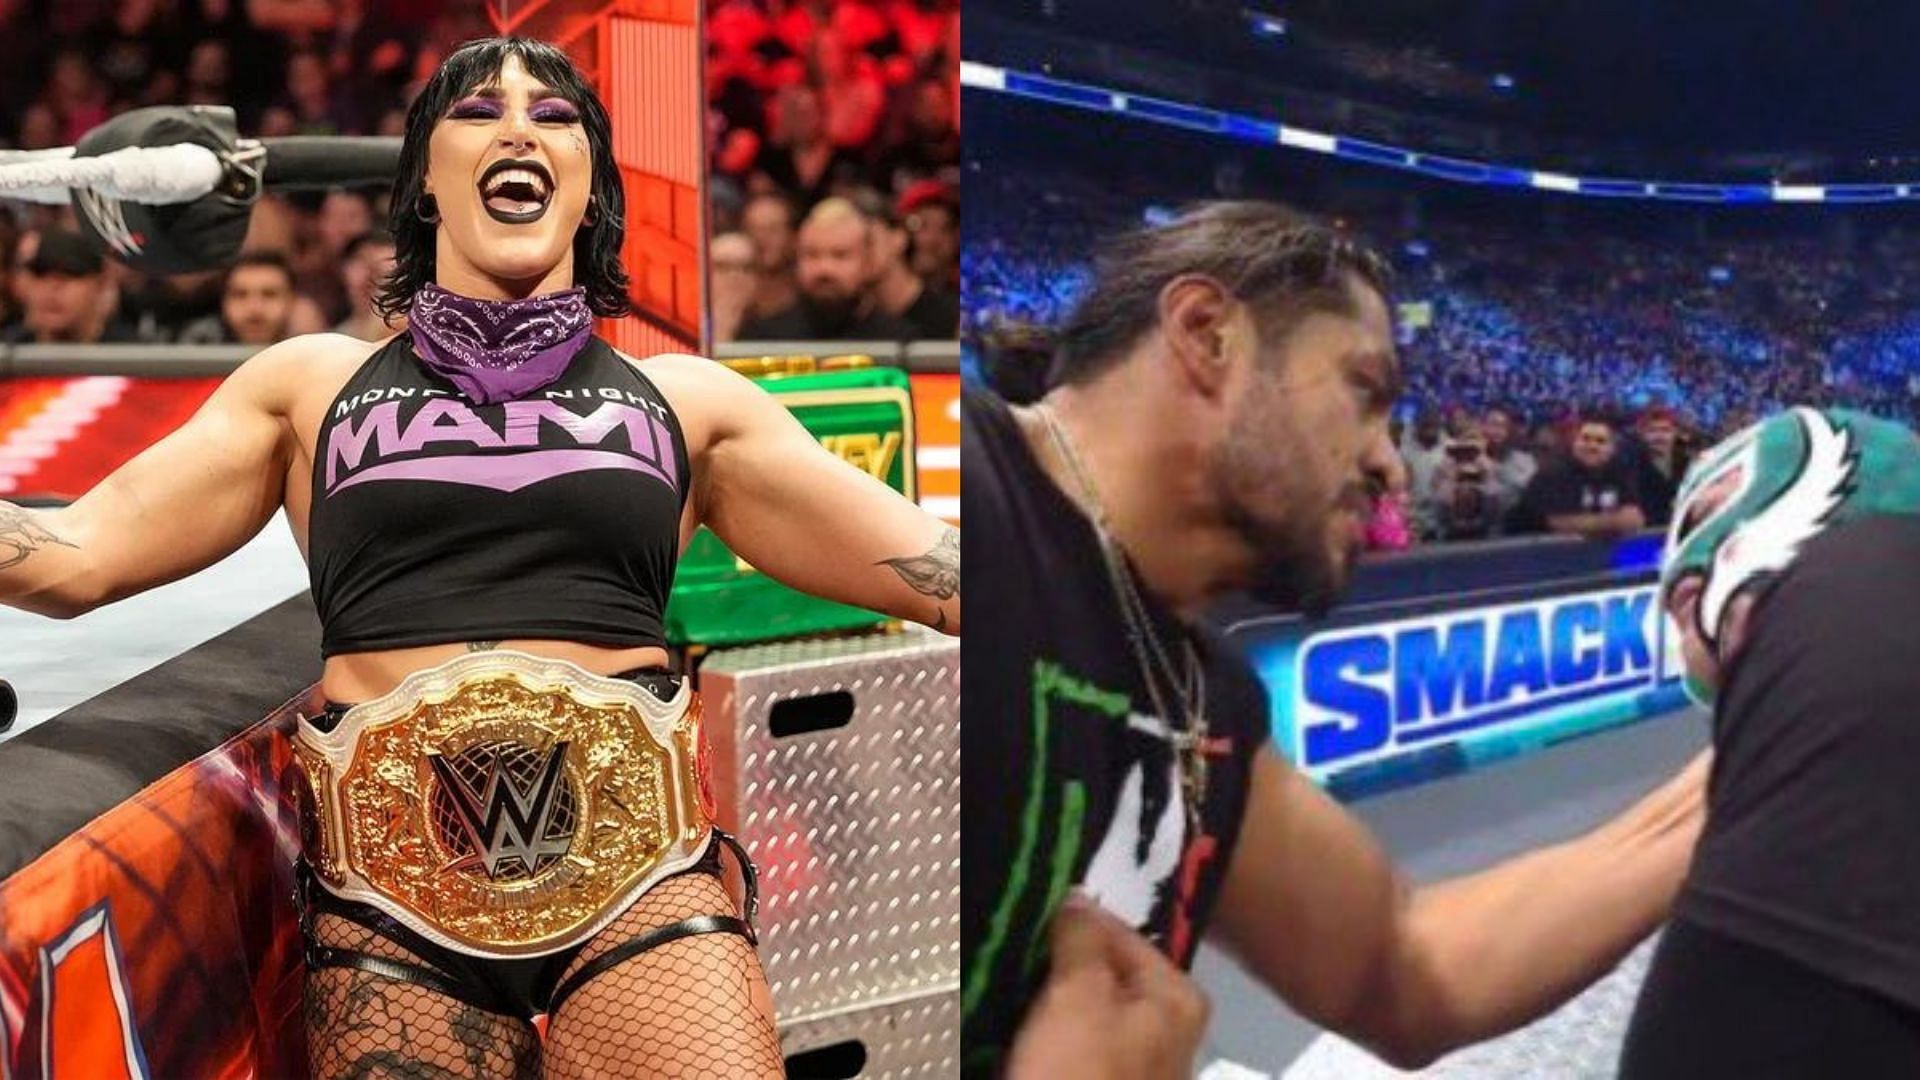 Rhea Ripley took shots at Rey Mysterio after SmackDown